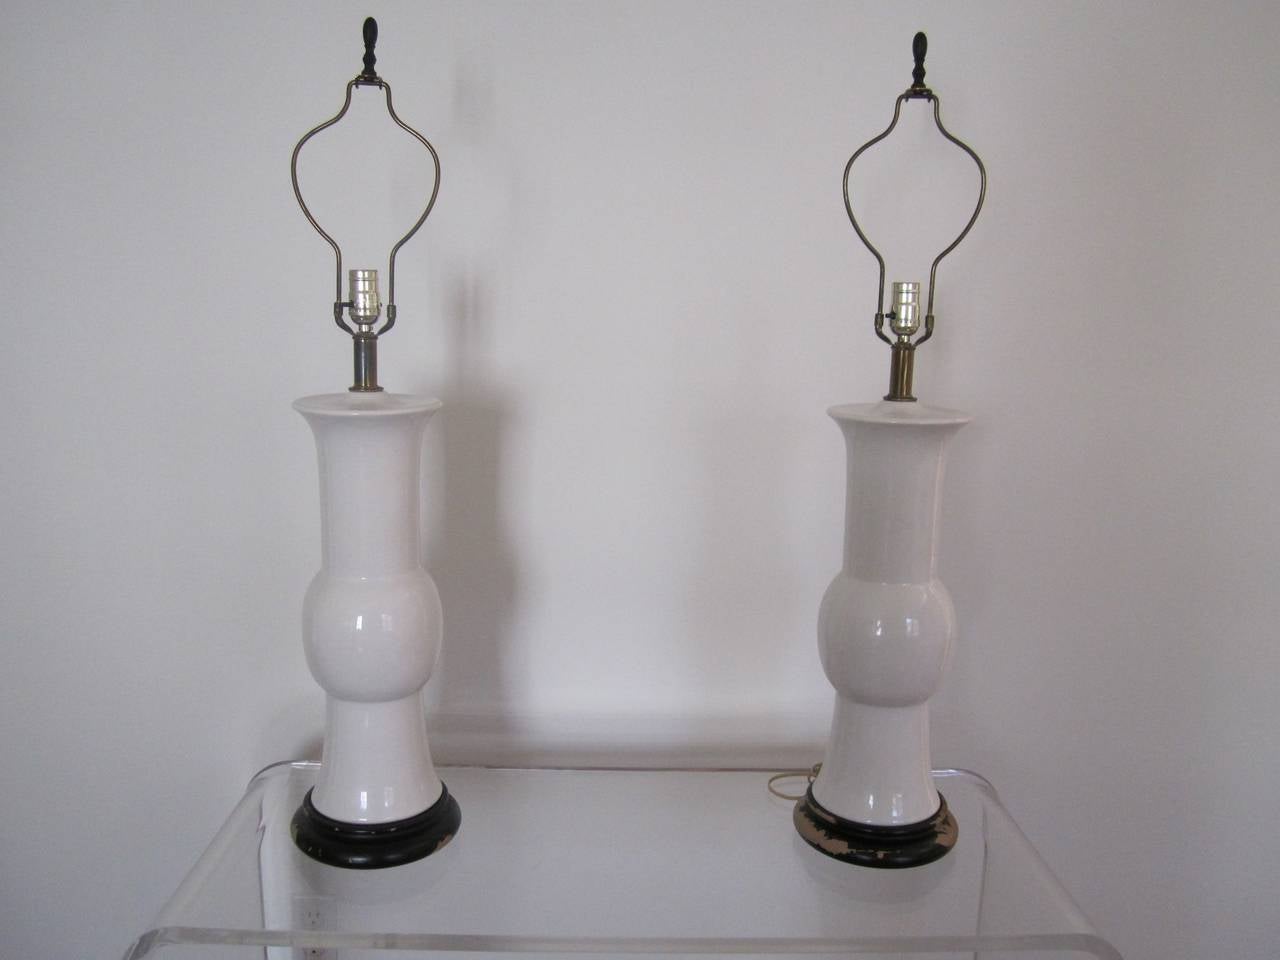 A stunning pair of vintage tall white 'blanc-de-chine' table lamps with original black wood bases and black metal turned finials, in the style of James Mont, circa 1960s.

Measures: 21 in. H to top of lamp base, or 29 in. H to top of original black